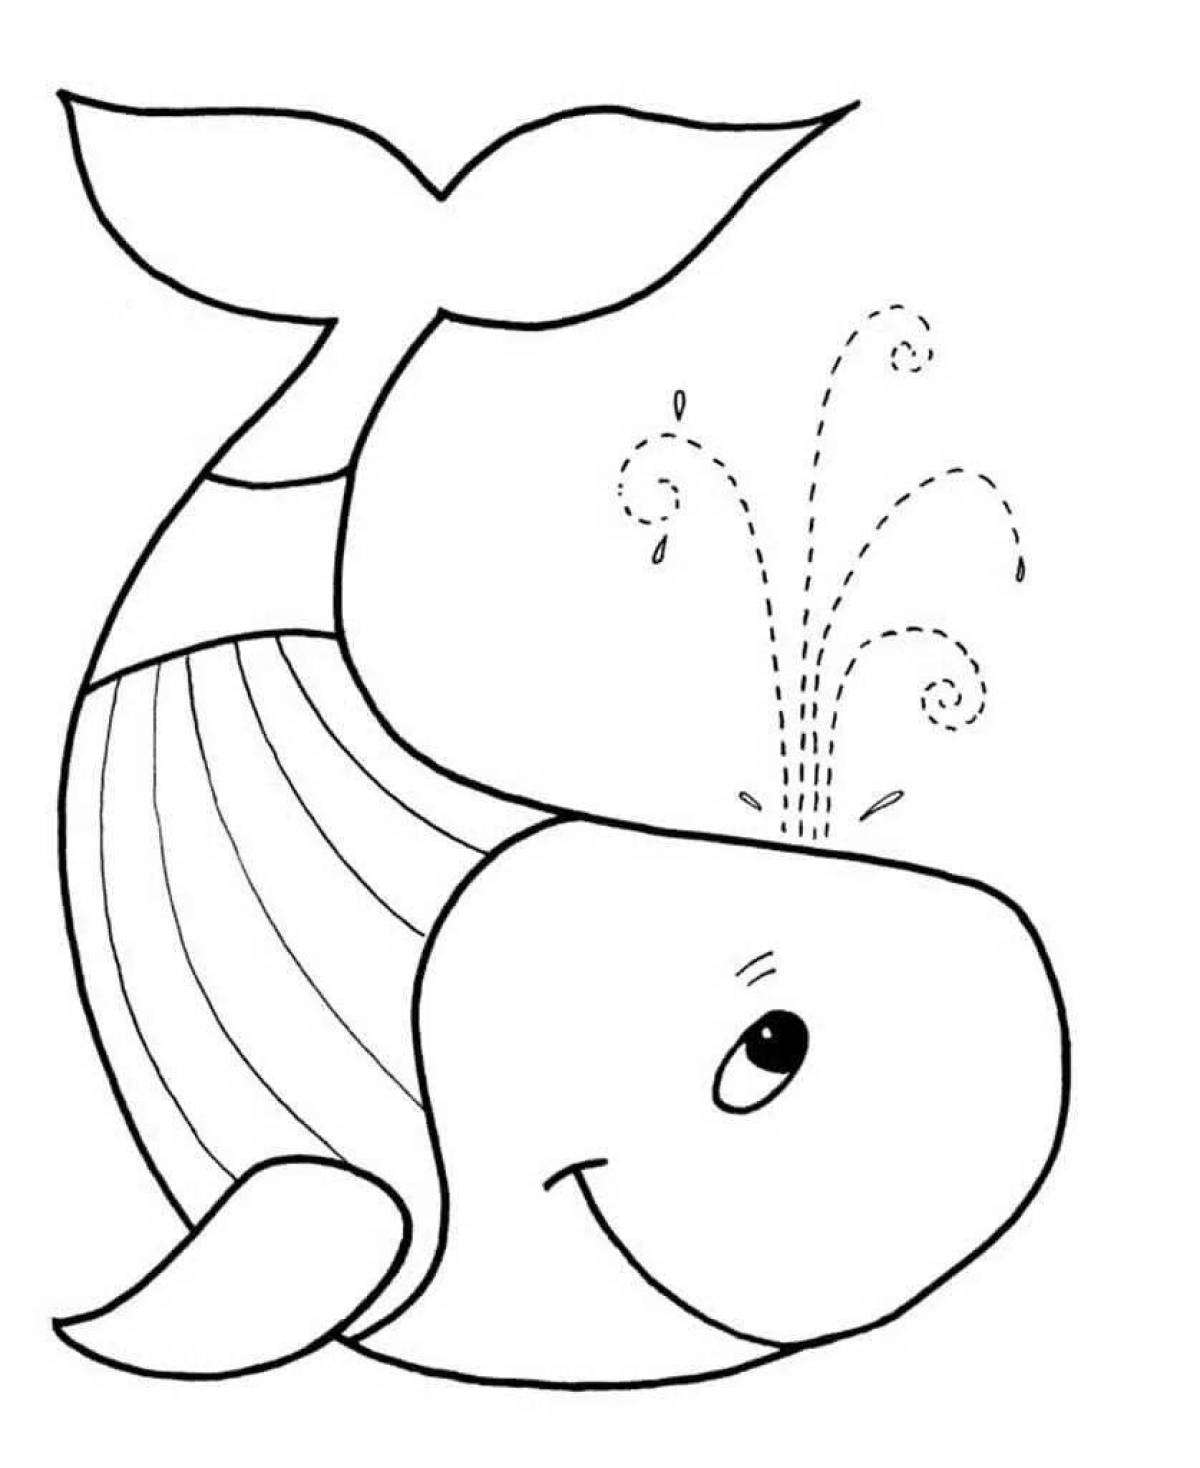 A fun marine life coloring book for 3-4 year olds